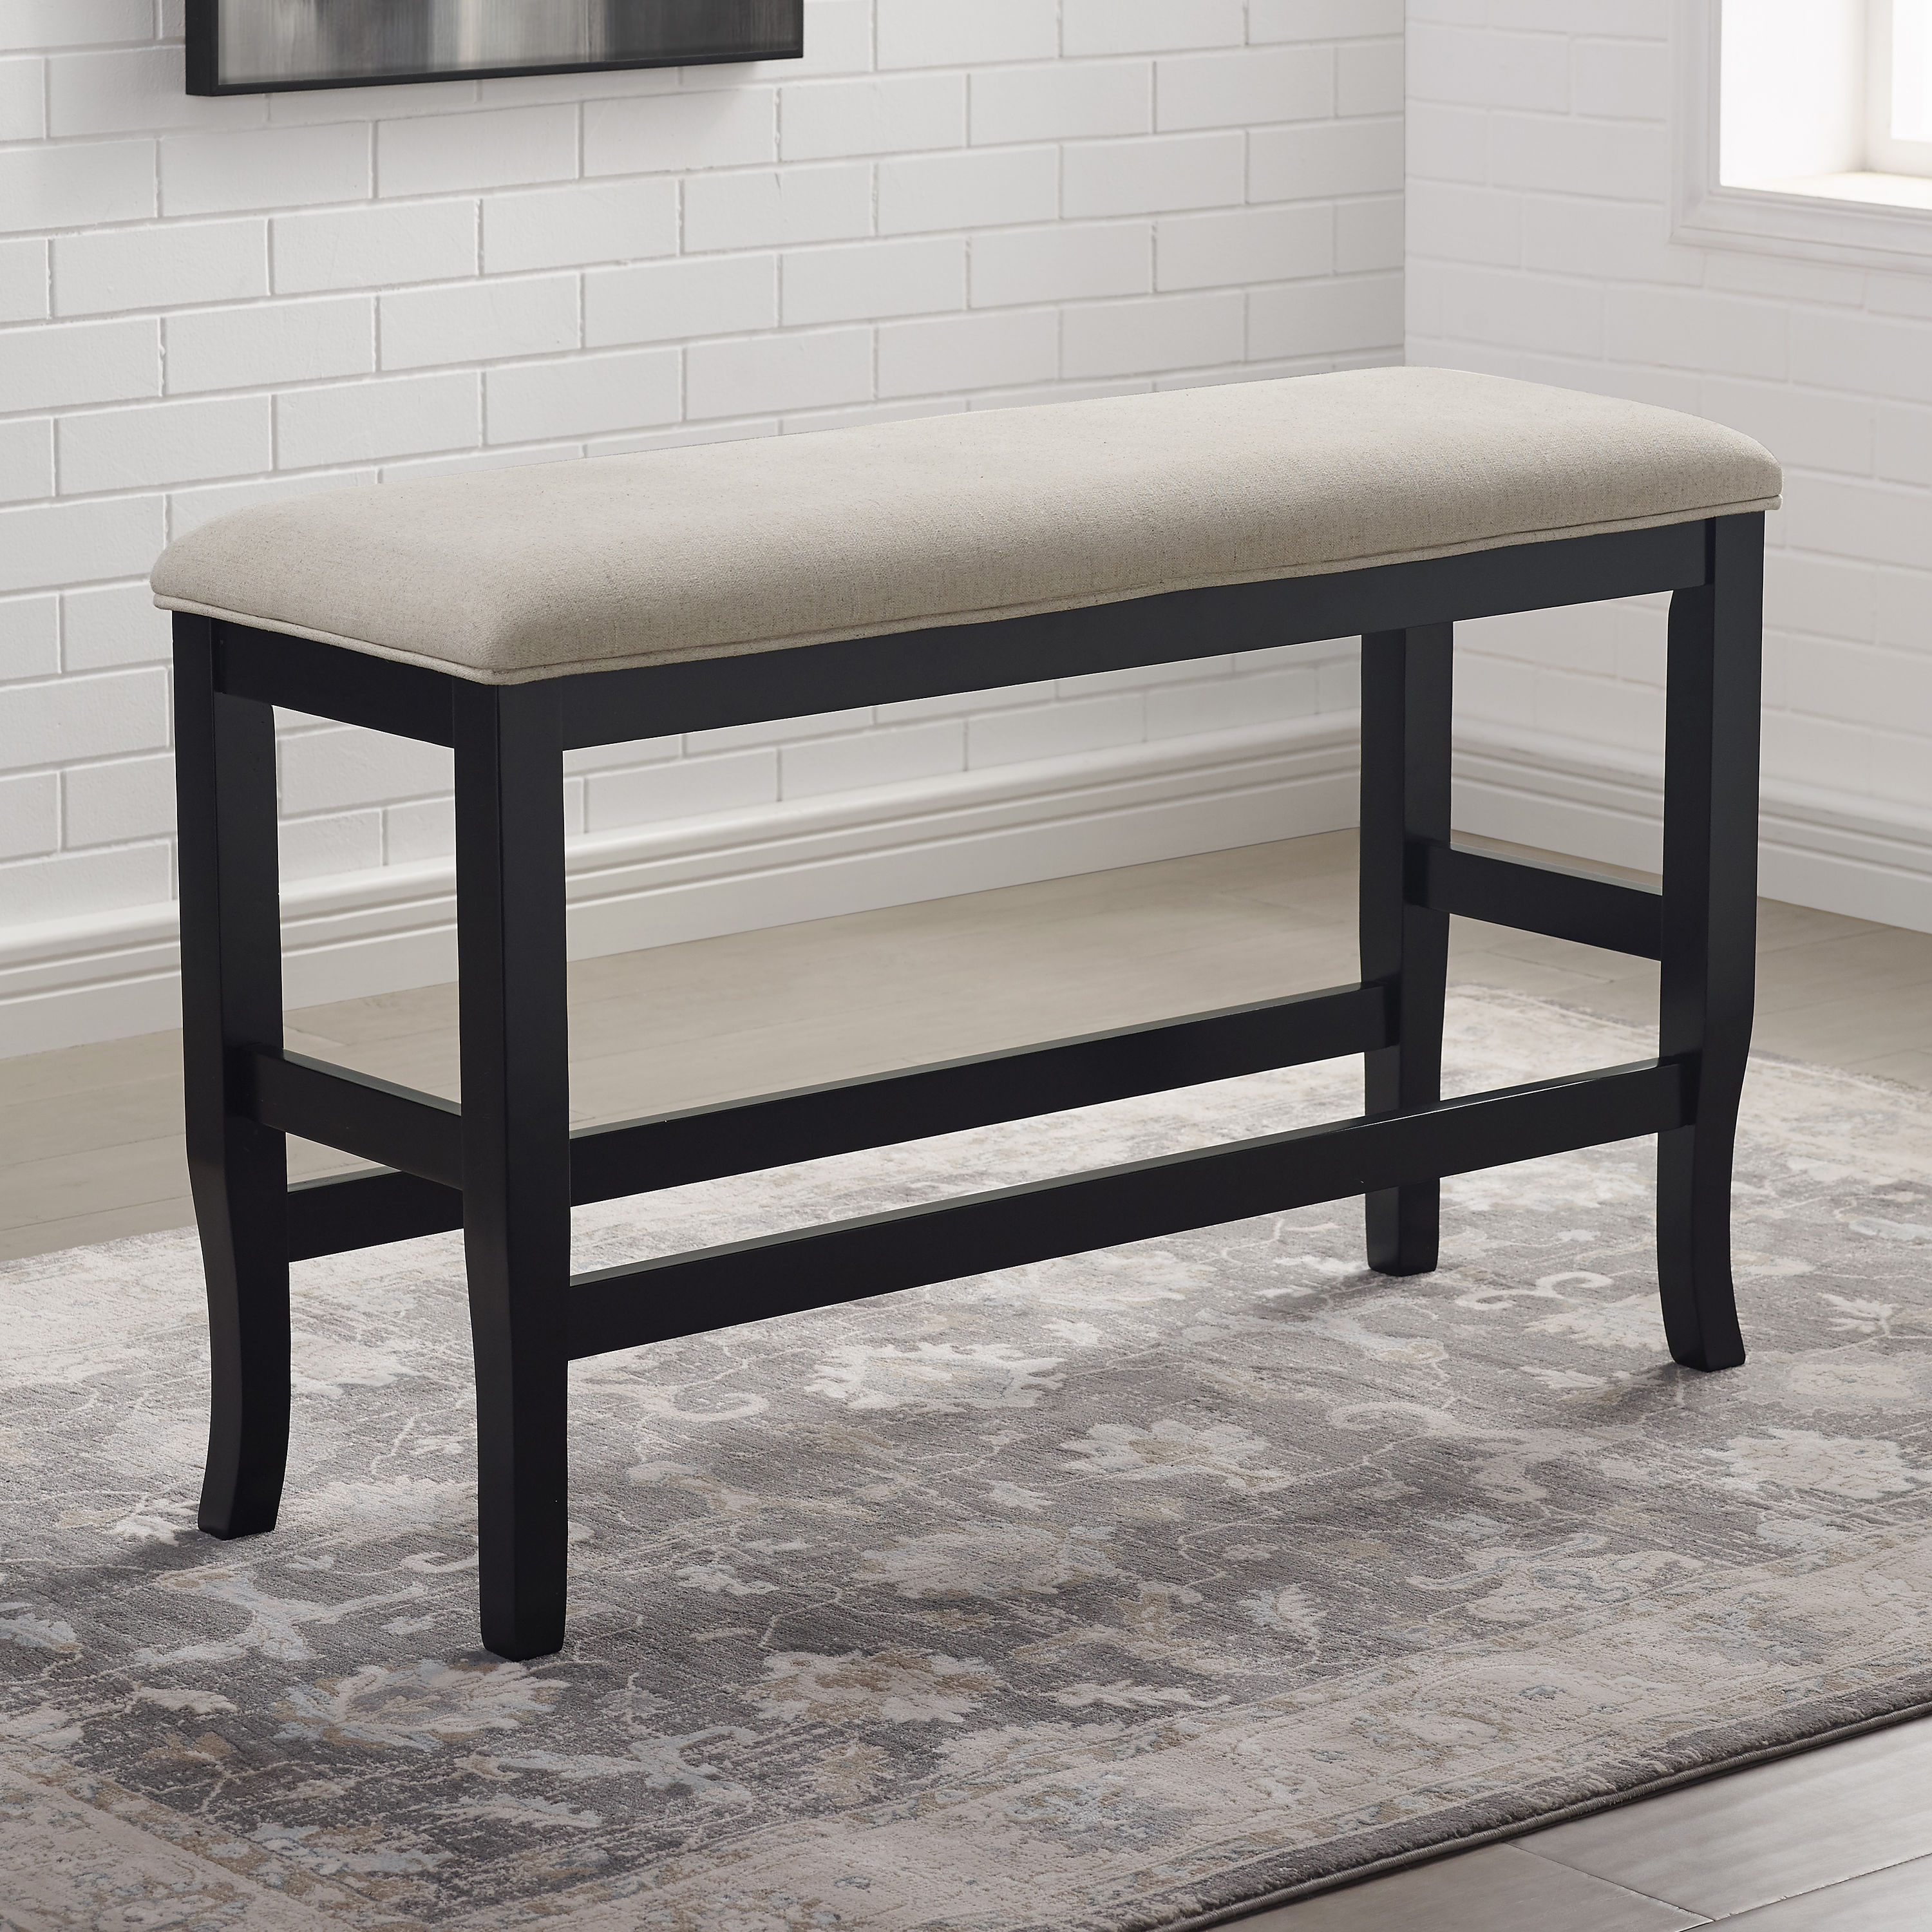 HOMES Inside Out IDF-3324BK-PBN Antique Black Greggory Rustic Counter-Height Bench